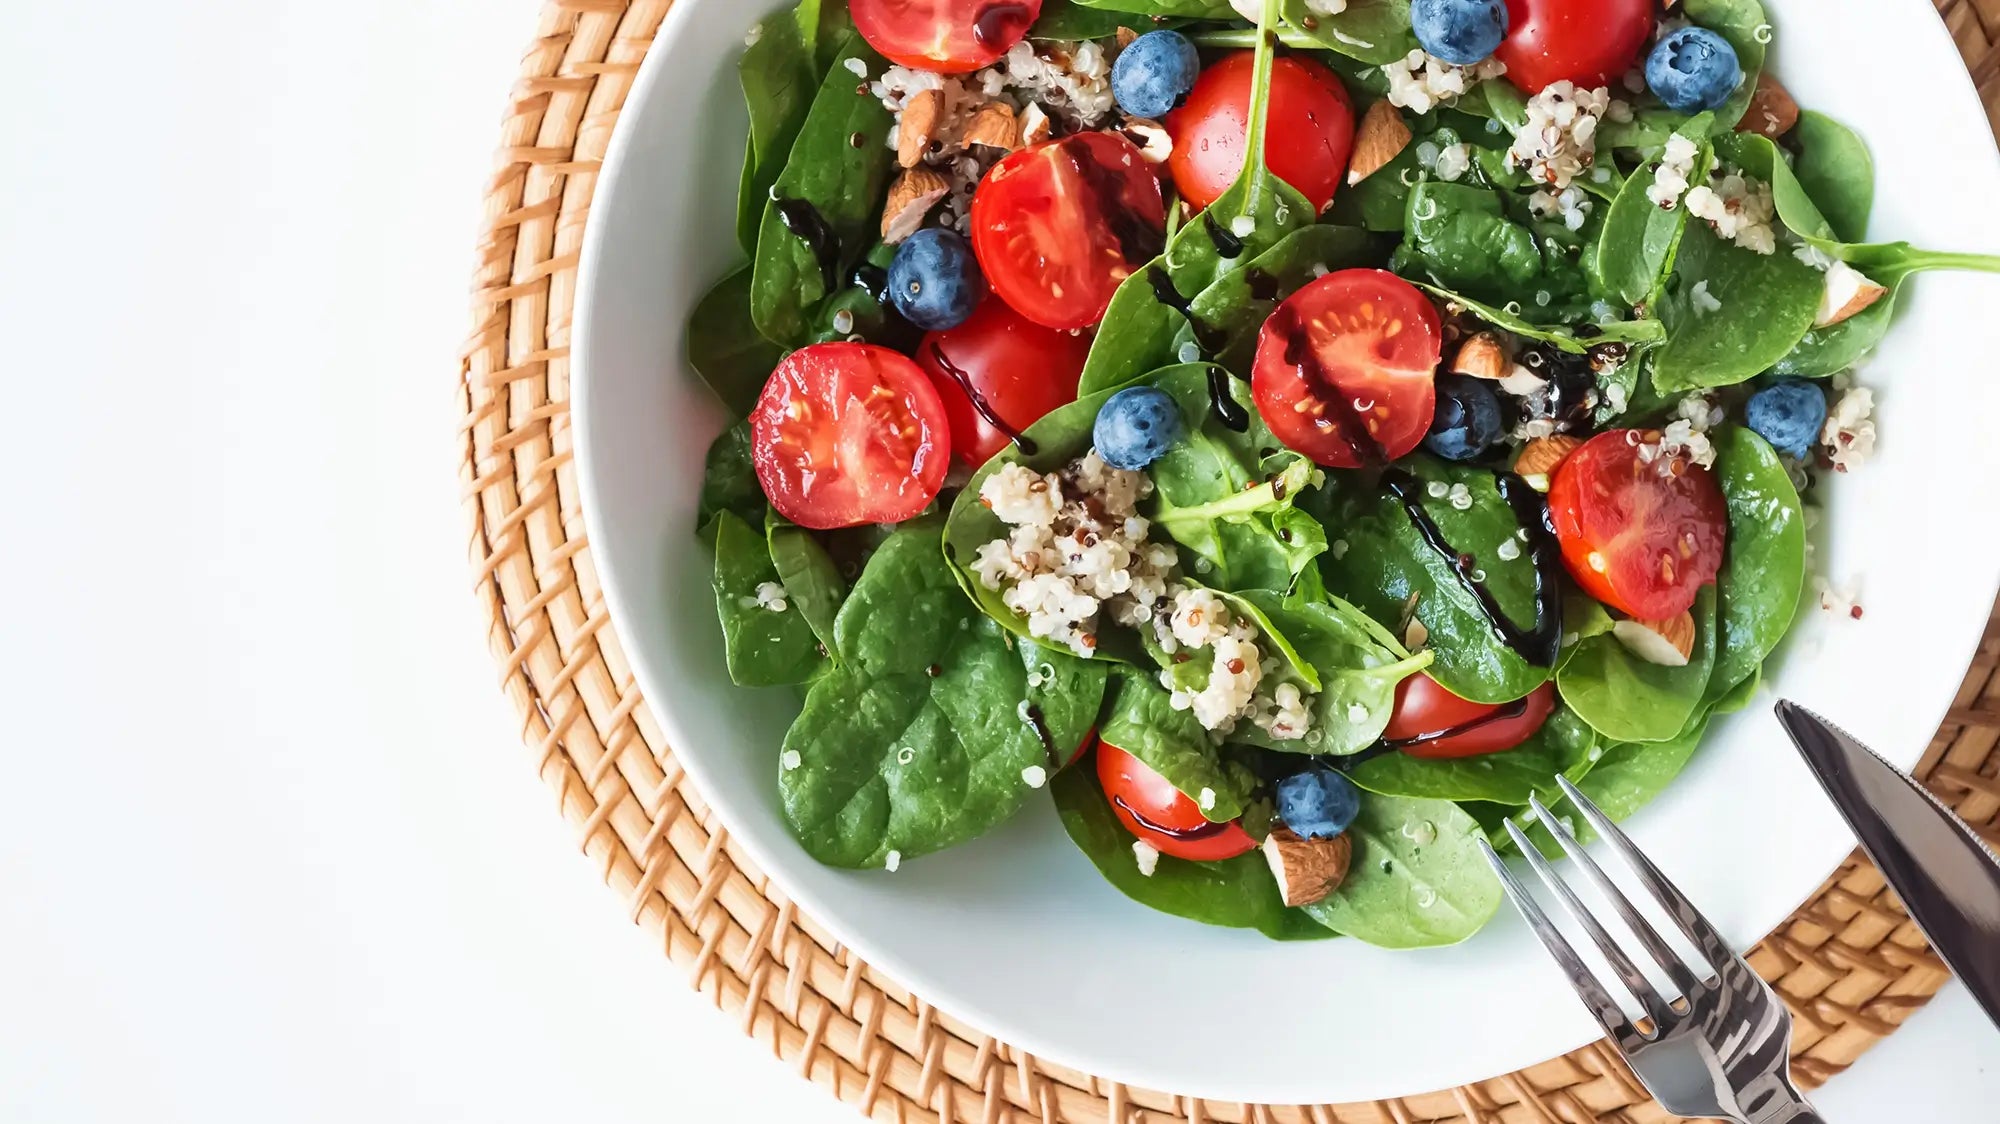 This 1 Nourishing Salad Has 8 Beauty Foods In It